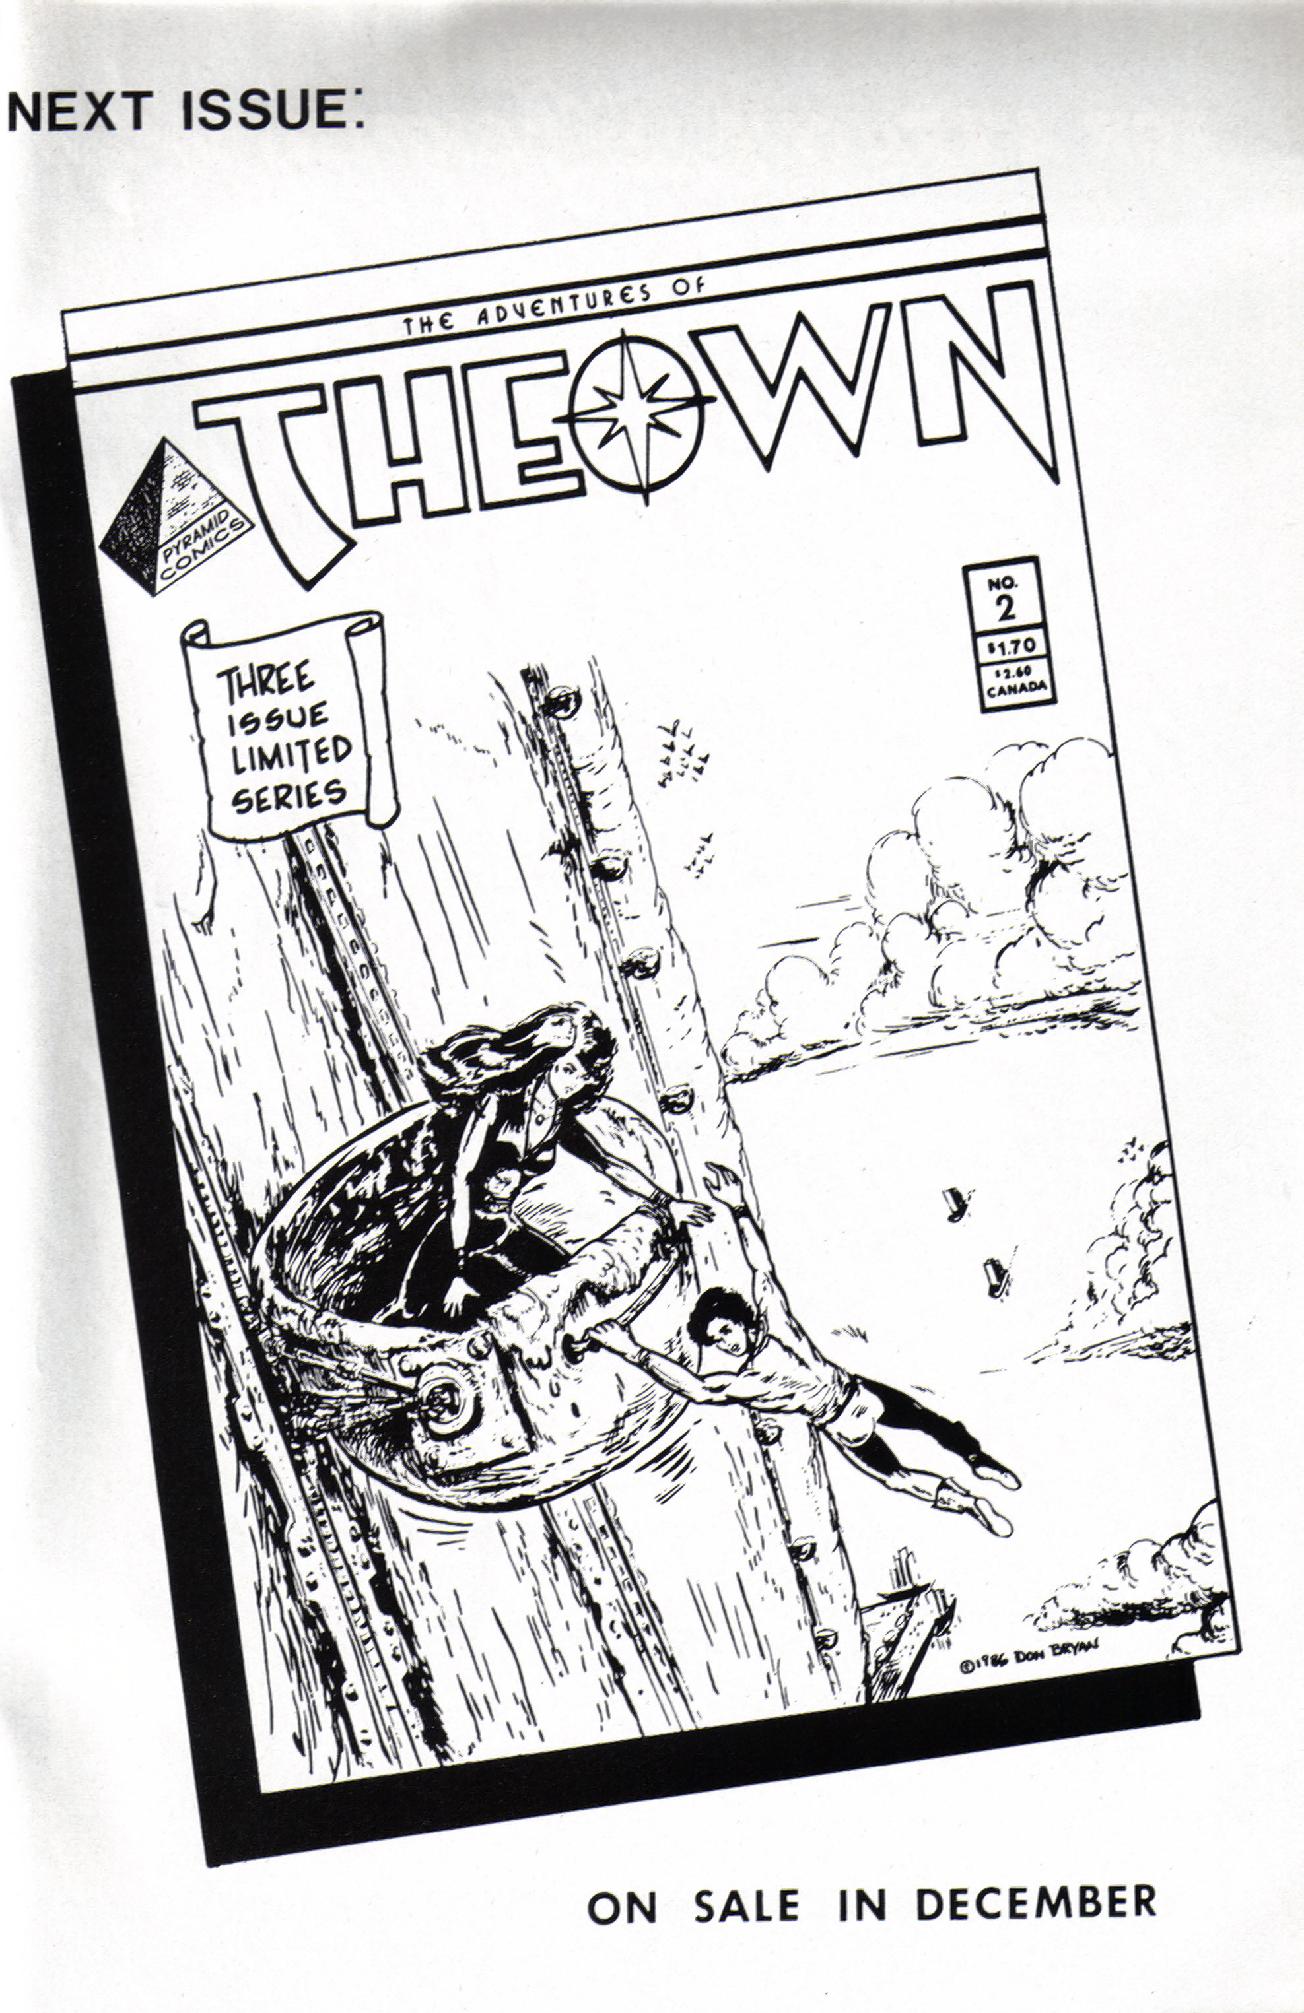 Read online The Adventures of Theown comic -  Issue #1 - 35